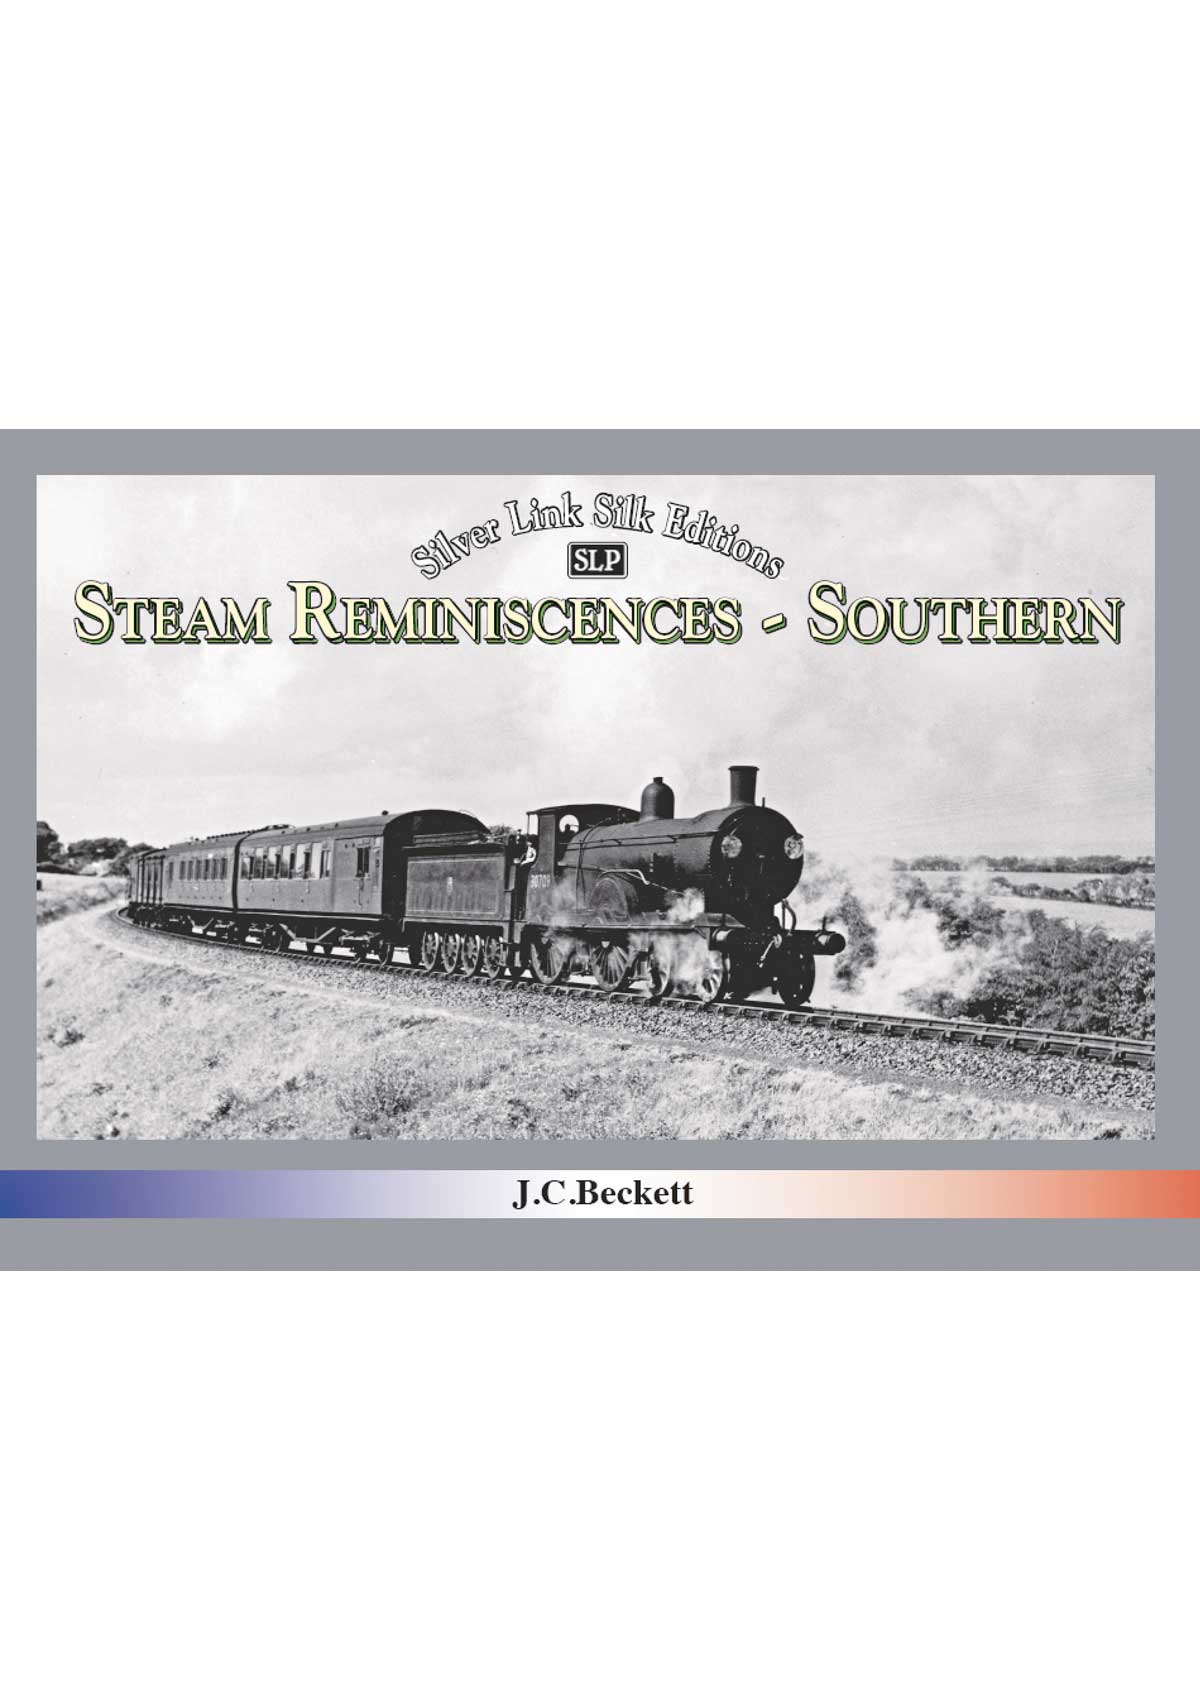 5478 Steam Reminiscences - Southern